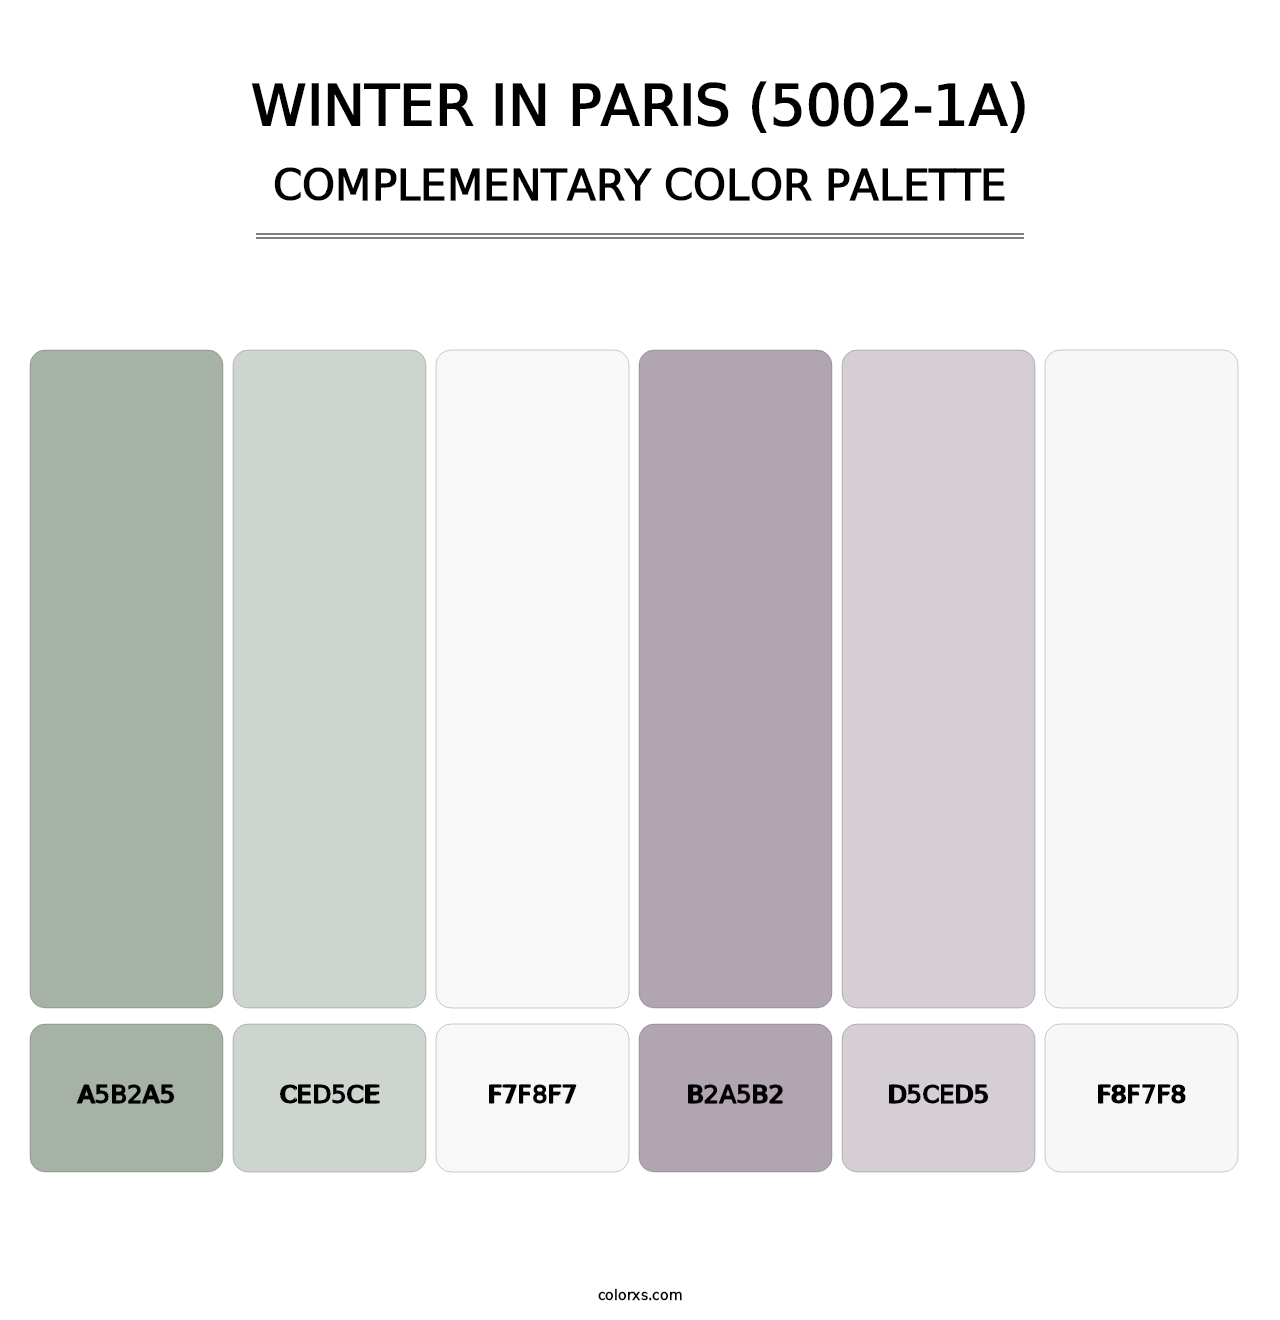 Winter in Paris (5002-1A) - Complementary Color Palette